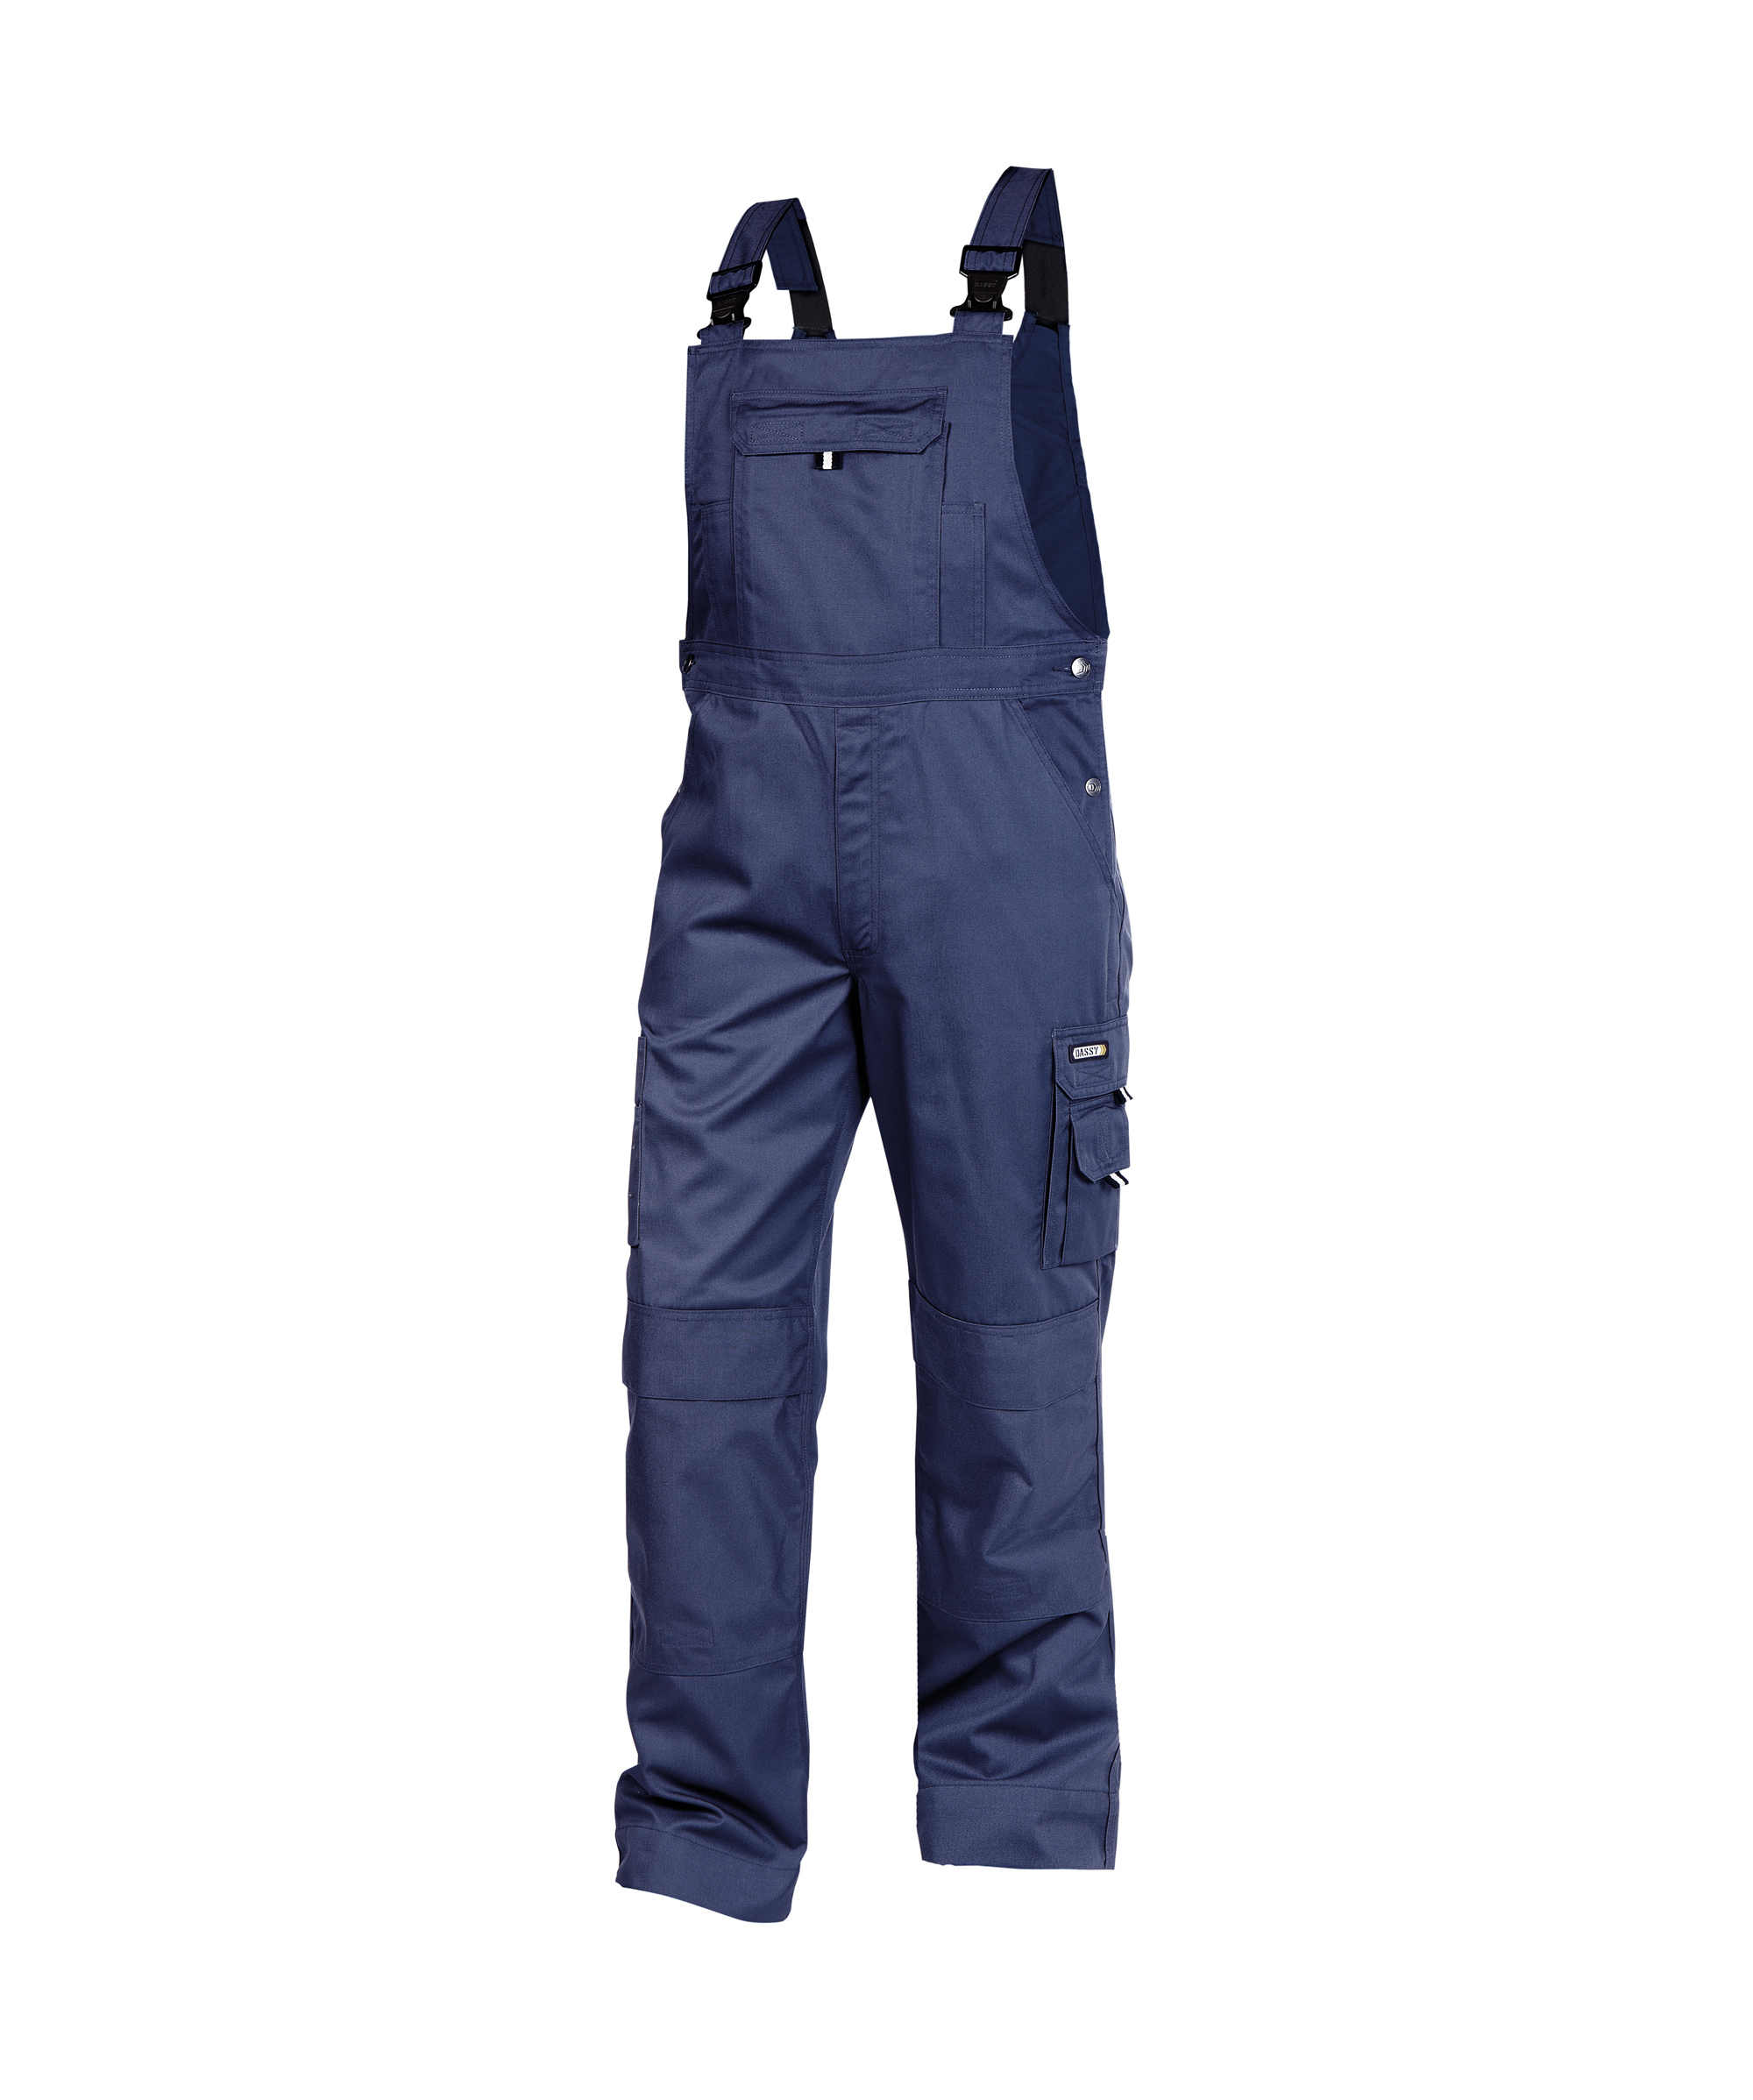 ventura_brace-overall-with-knee-pockets_navy_front.jpg